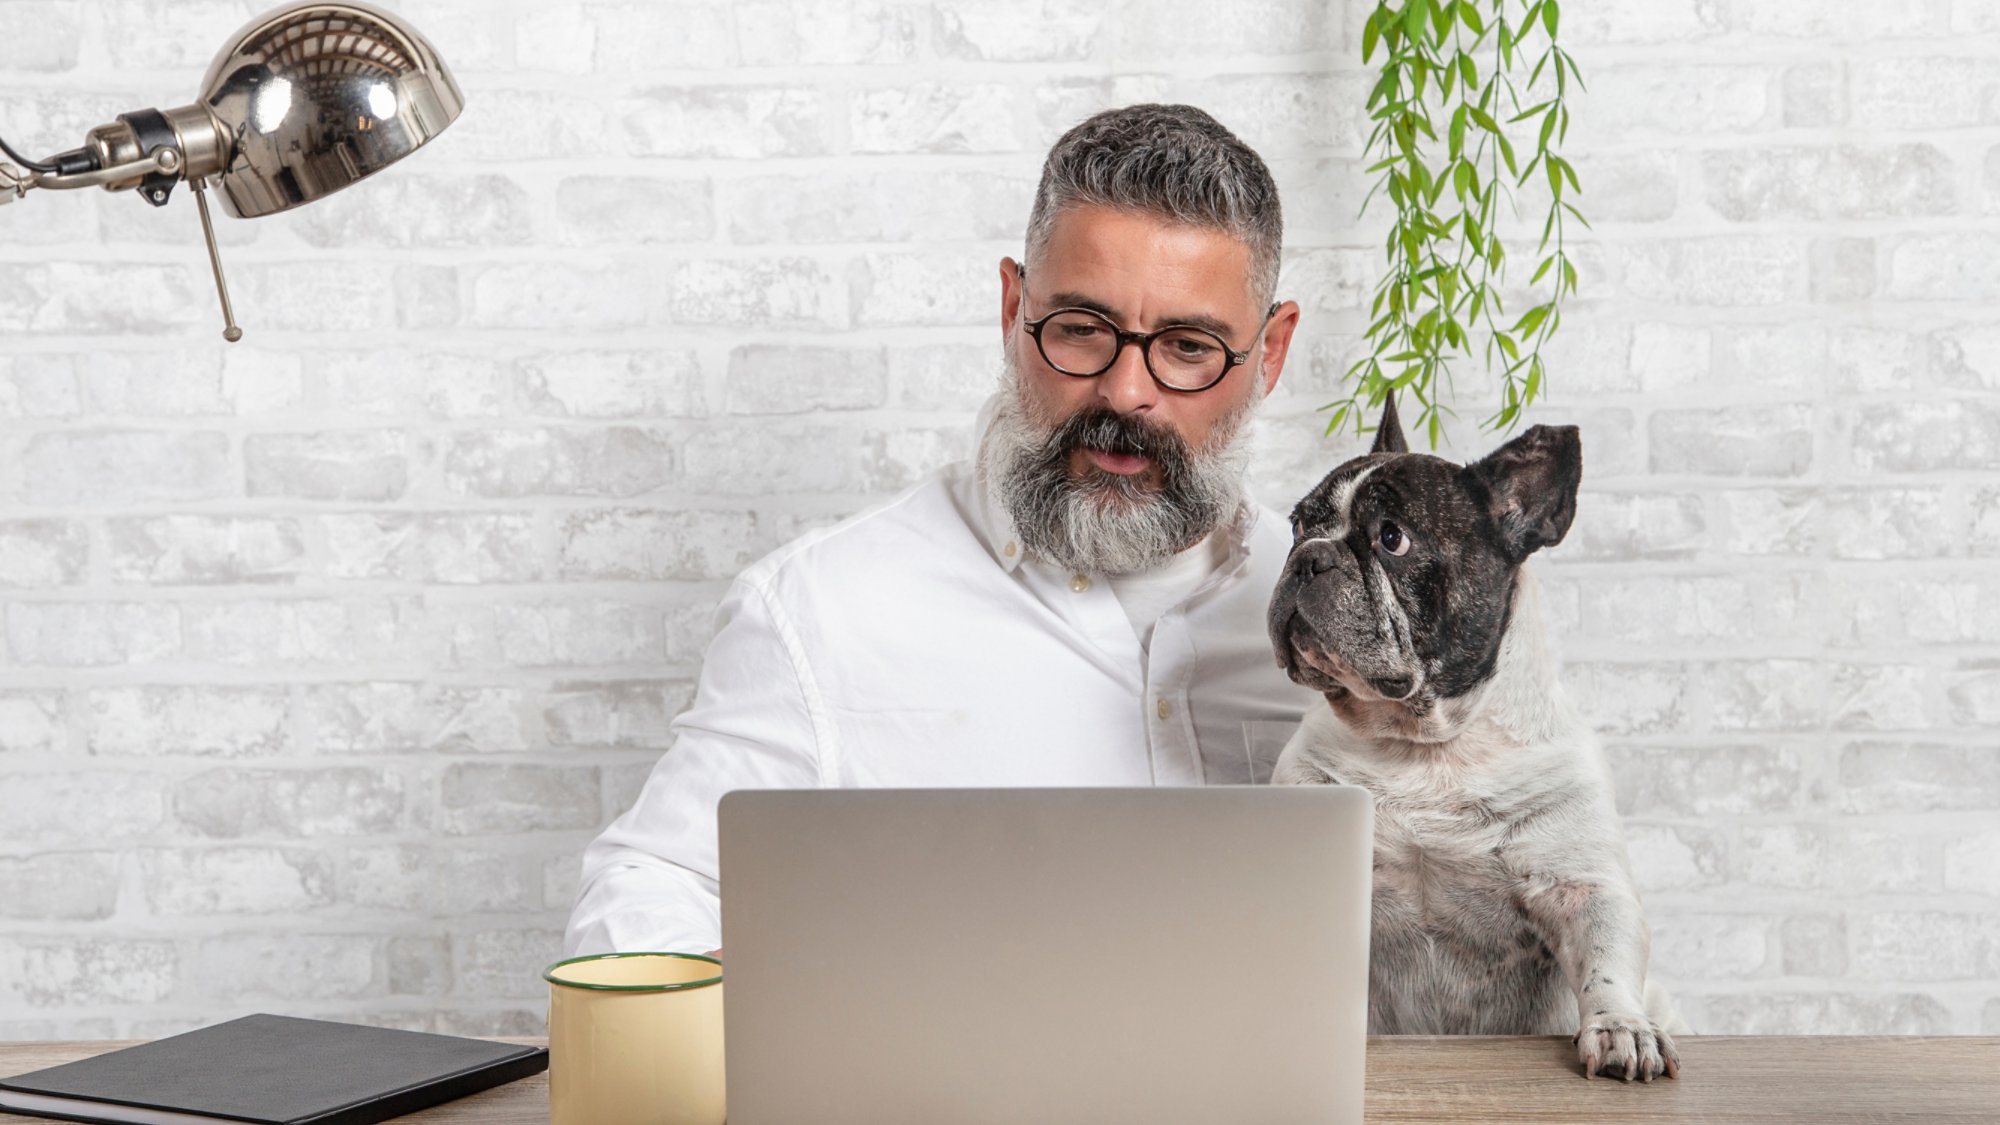 Freelance man working from home with his dog sitting together in office